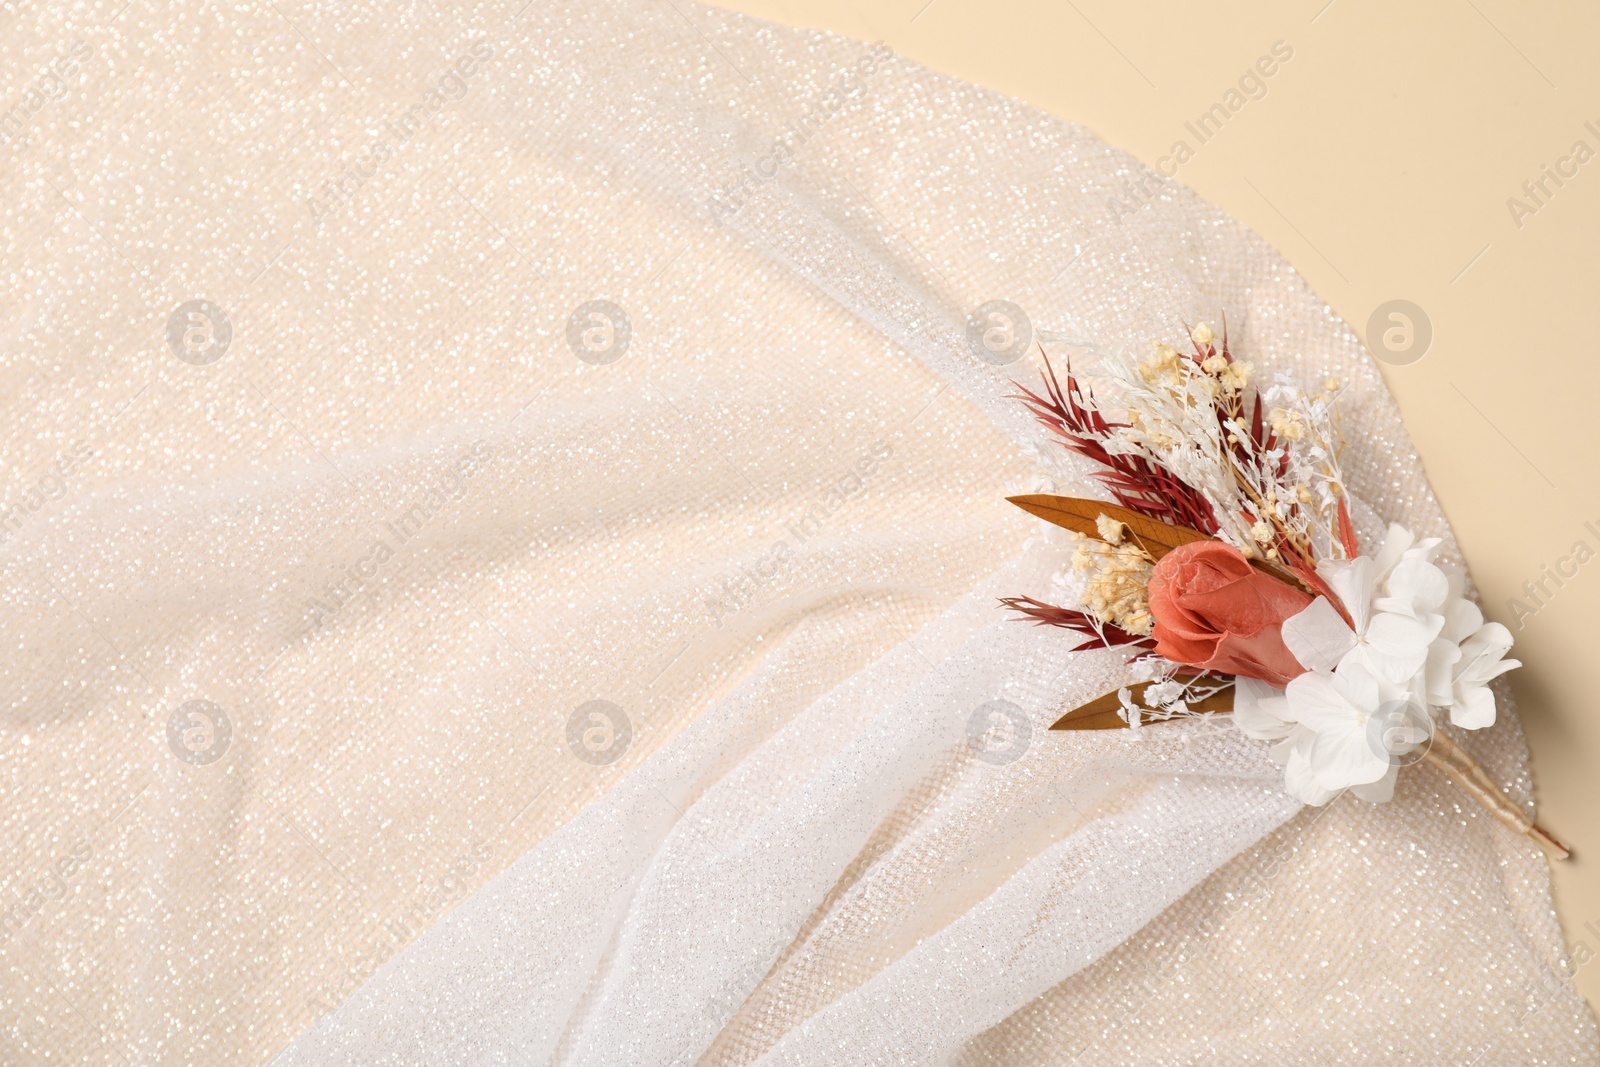 Photo of Stylish boutonniere and white fabric on beige background, top view. Space for text